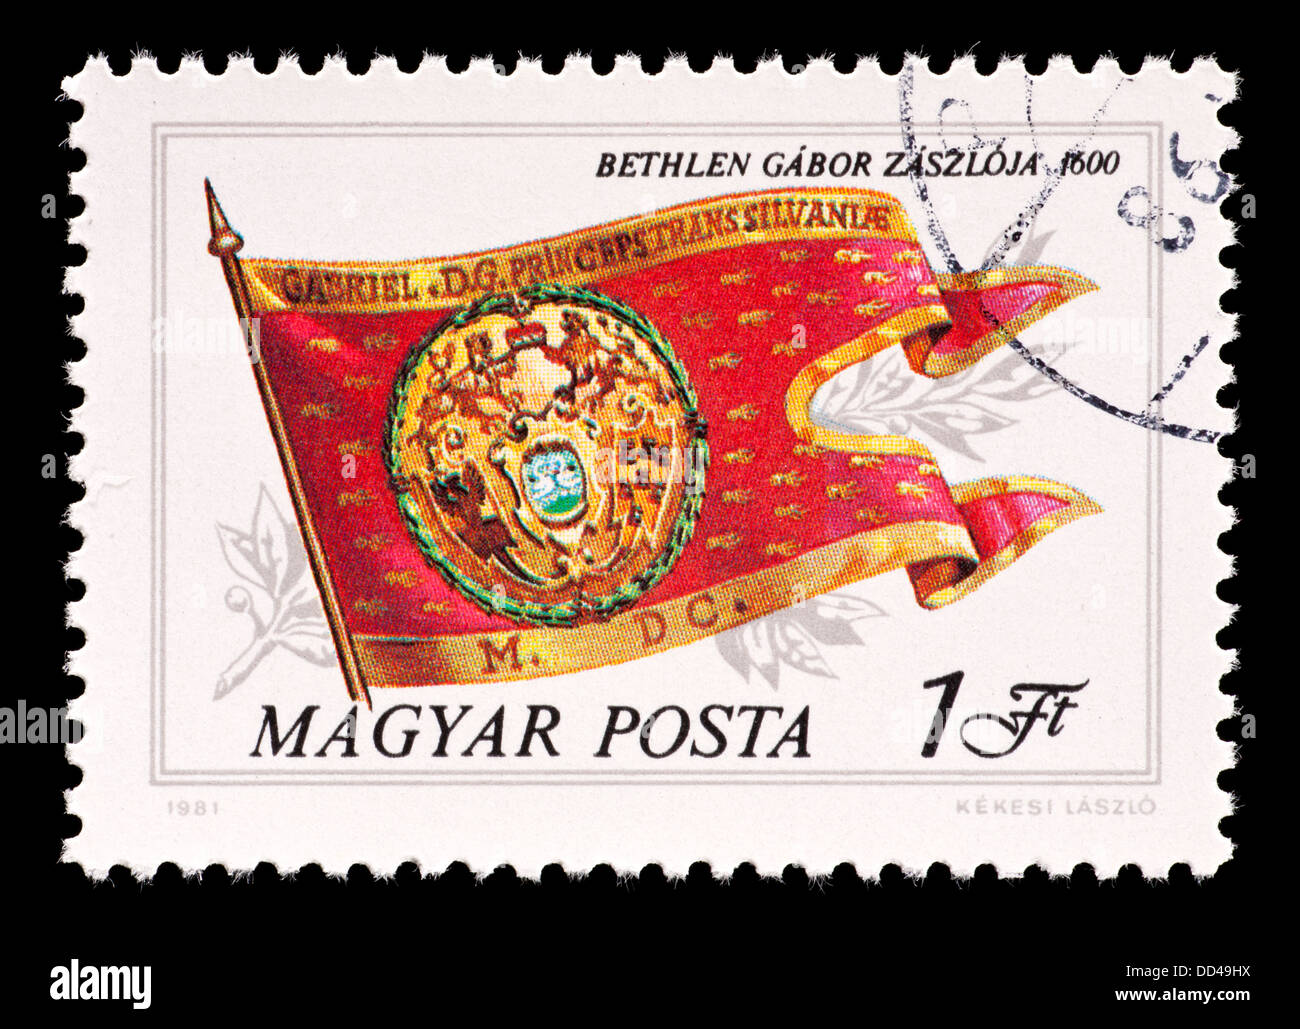 Postage stamp from Hungary depicting the flag of the house Gabor Bethlen. Stock Photo